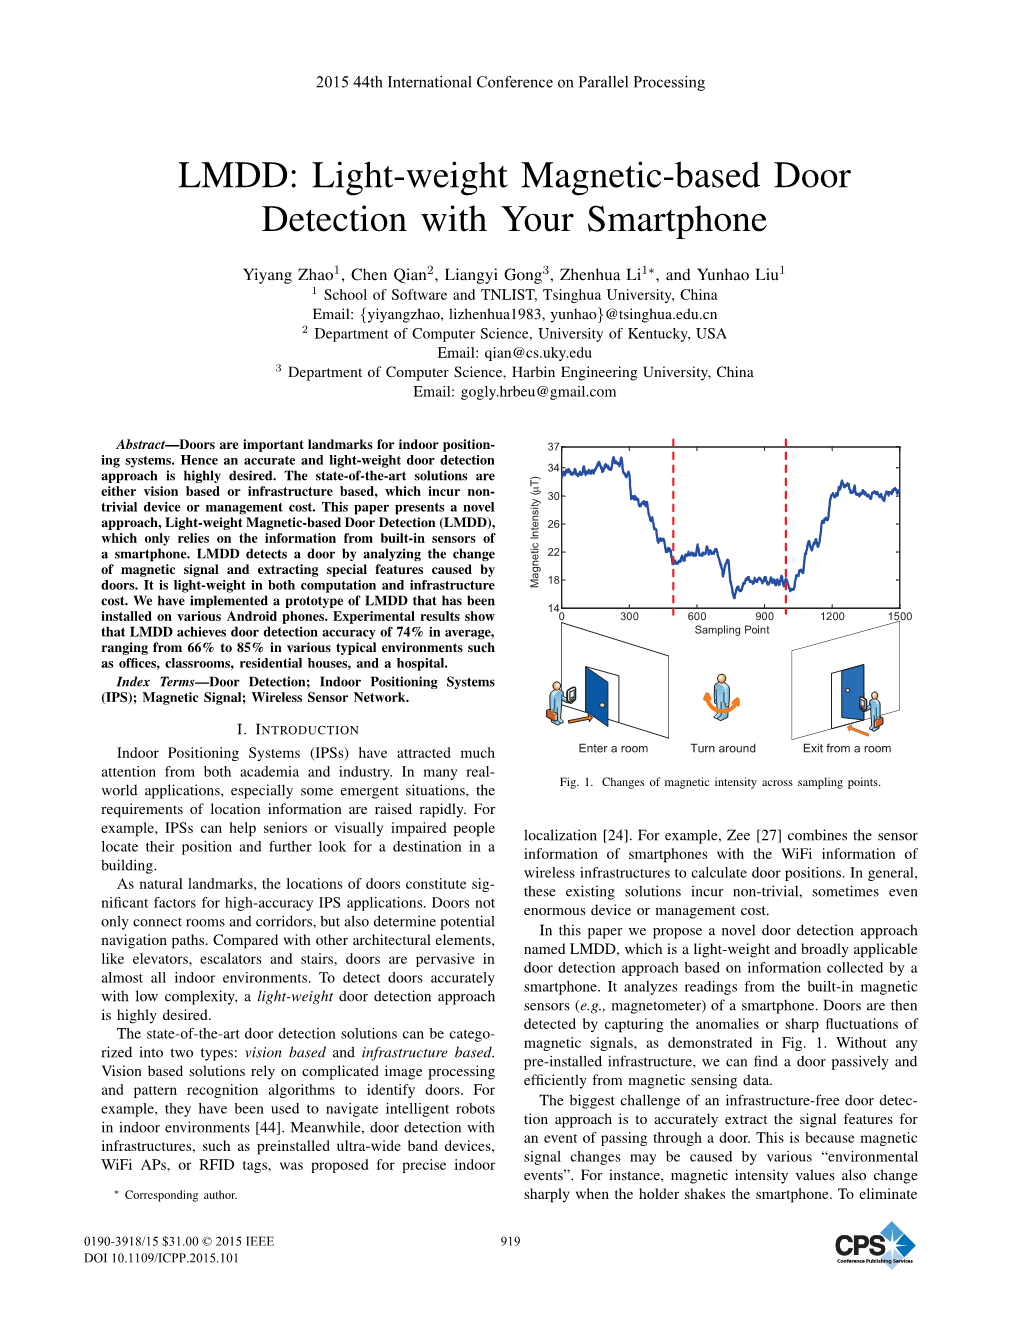 LMDD: Light-Weight Magnetic-Based Door Detection with Your Smartphone